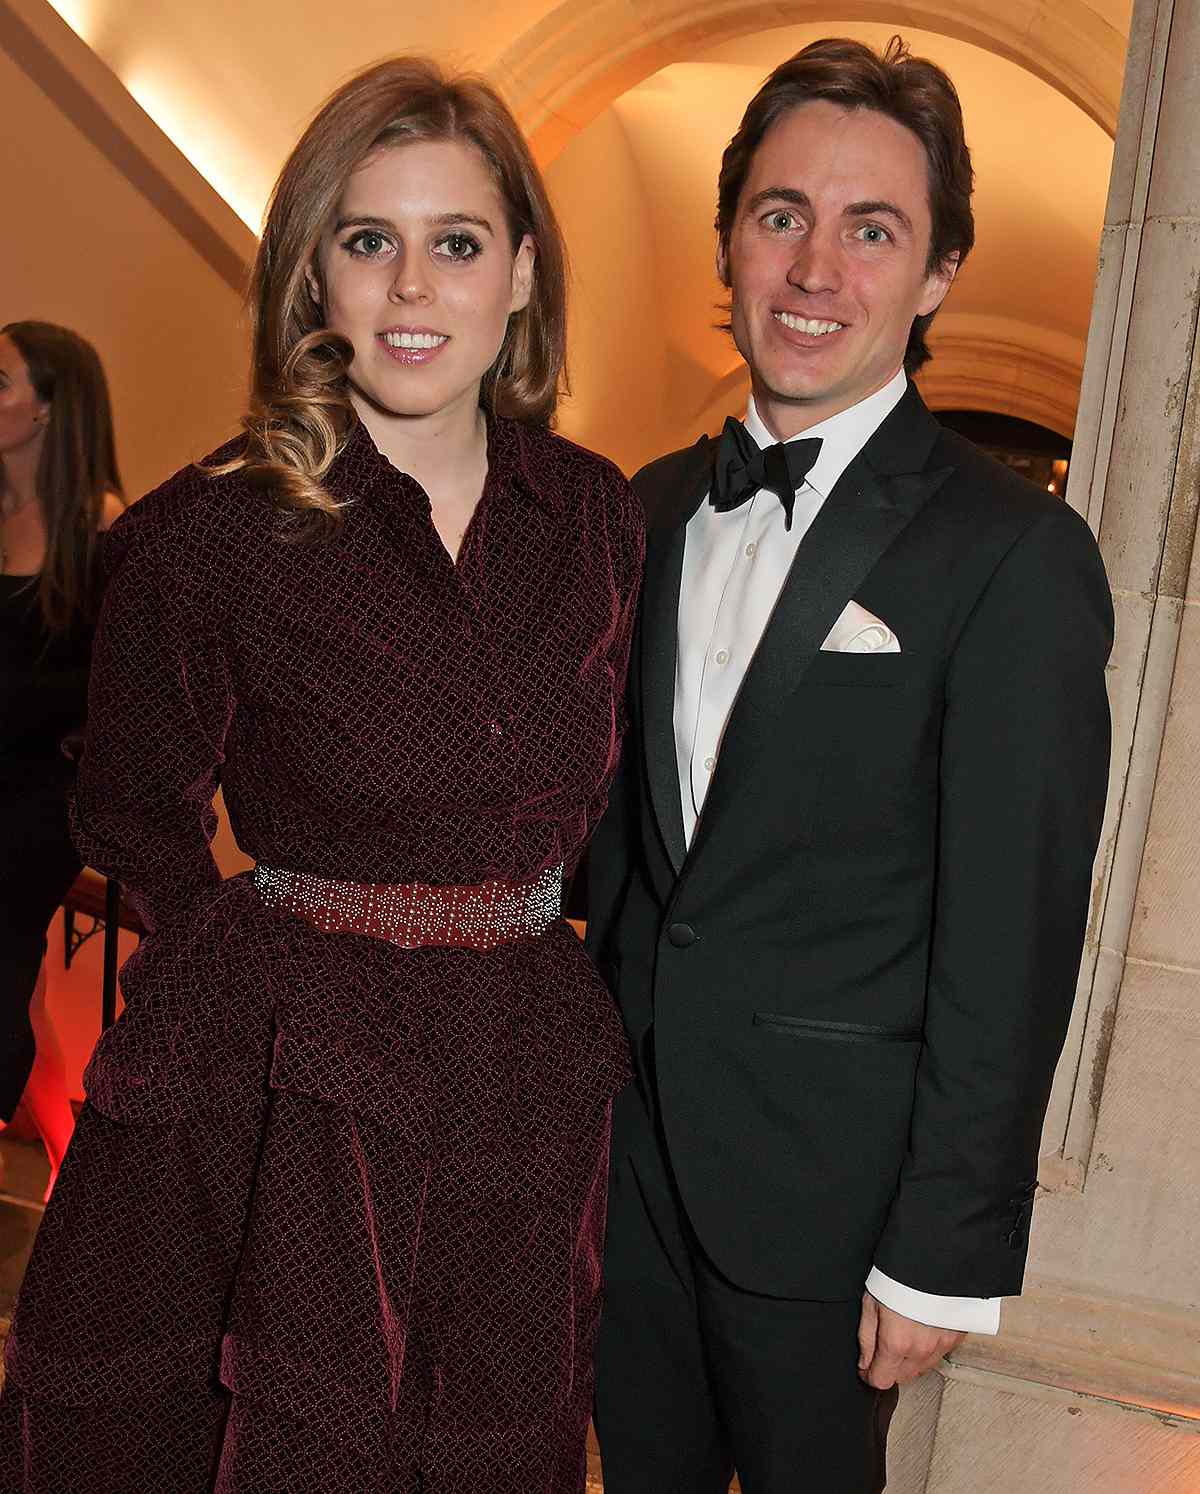 Princess Beatrice of York and Edoardo Mapelli Mozzi attend The Portrait Gala 2019 hosted by Dr Nicholas Cullinan and Edward Enninful to raise funds for the National Portrait Gallery's 'Inspiring People' project at the National Portrait Gallery on March 12, 2019 in London, England